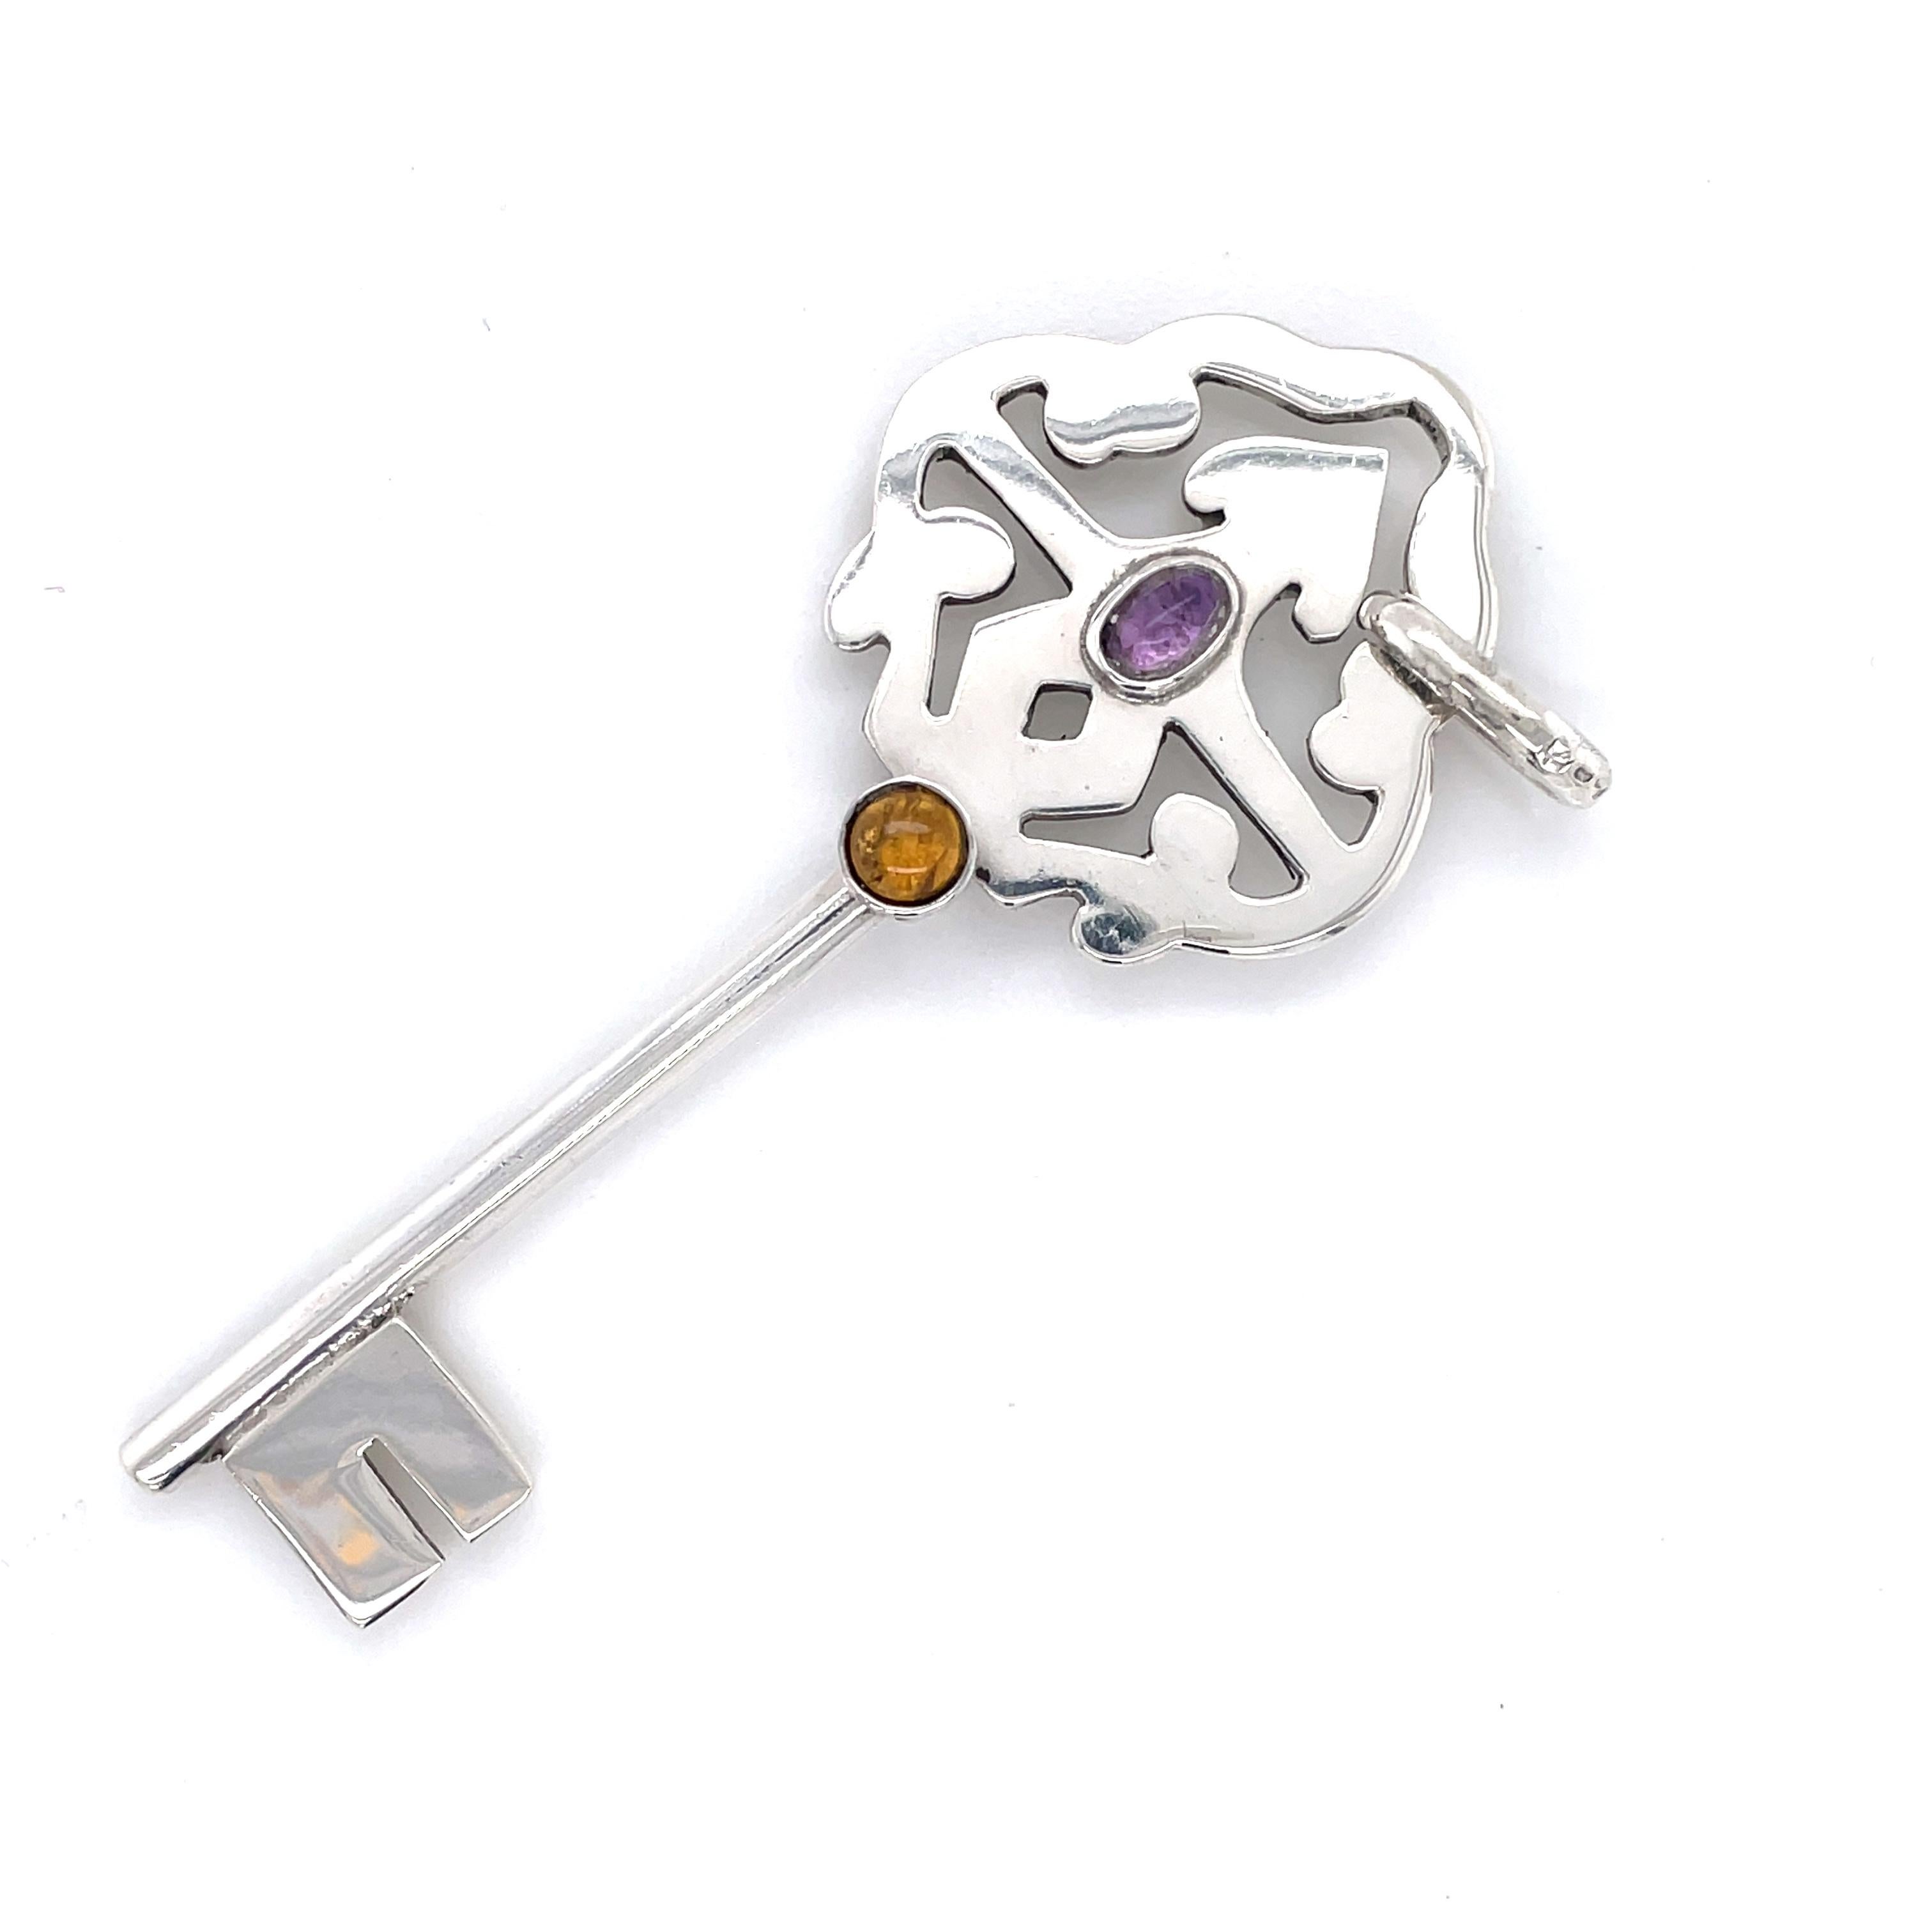 This fun vintage sterling silver key charm makes a unique addition as a pendant for one of your longer chains or added to a key ring. Measuring at three inches, this silver charm has a pop of color accented with an amethyst and a citrine cabochon.